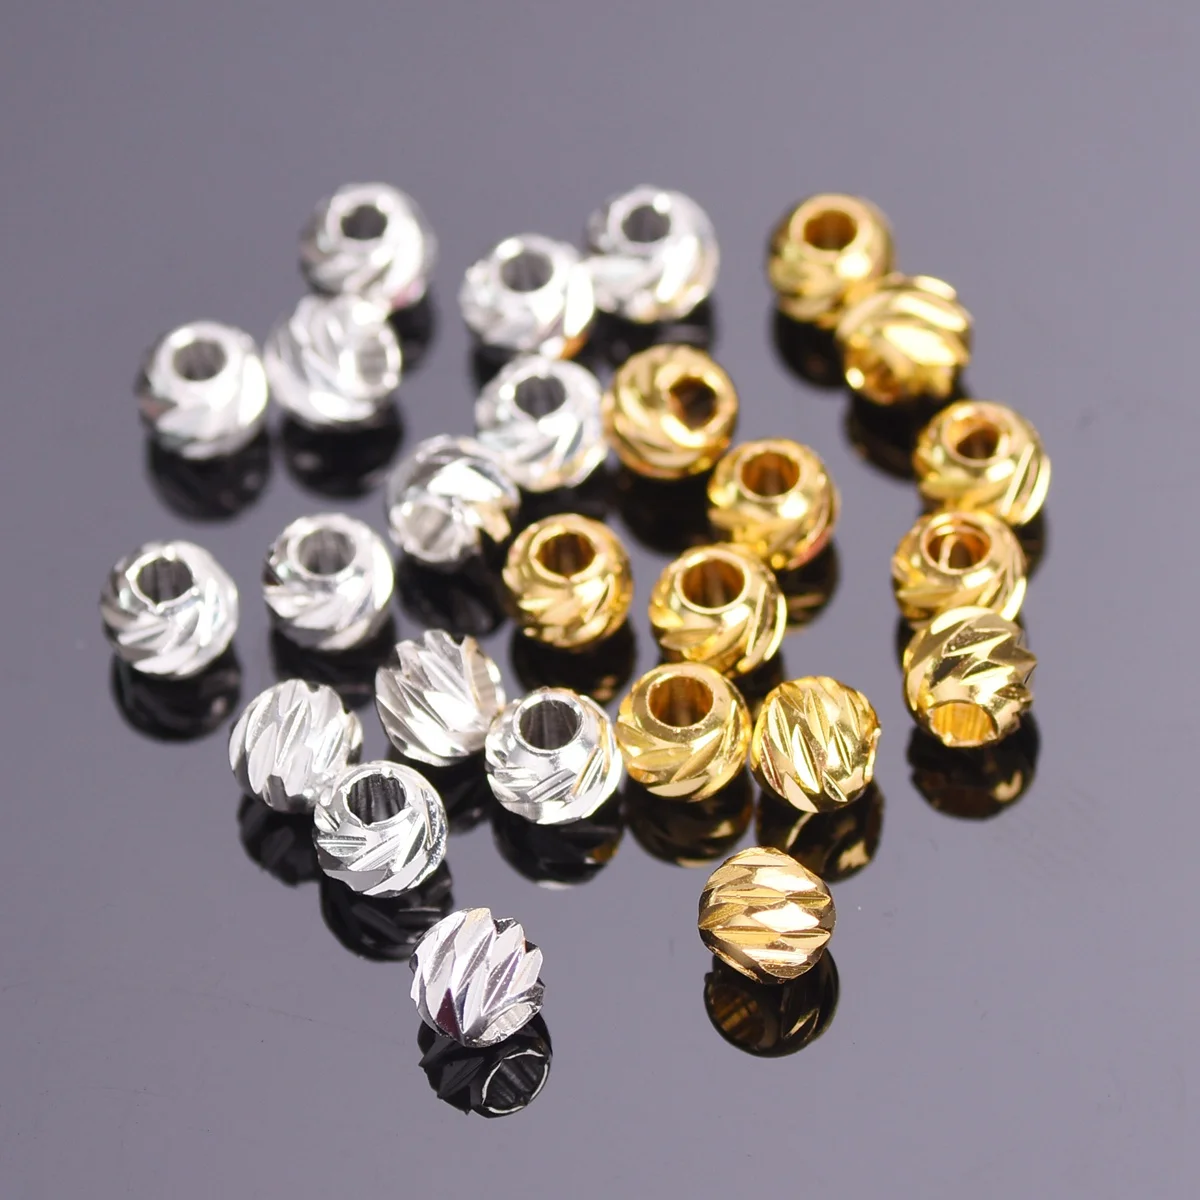 Round Carved 3mm 4mm 5mm 6mm 8mm Gold Color Silver Color Plated Brass Metal Loose Spacer Beads For Jewelry Making струны brass round wound 028 047 нейлон латунная навивка